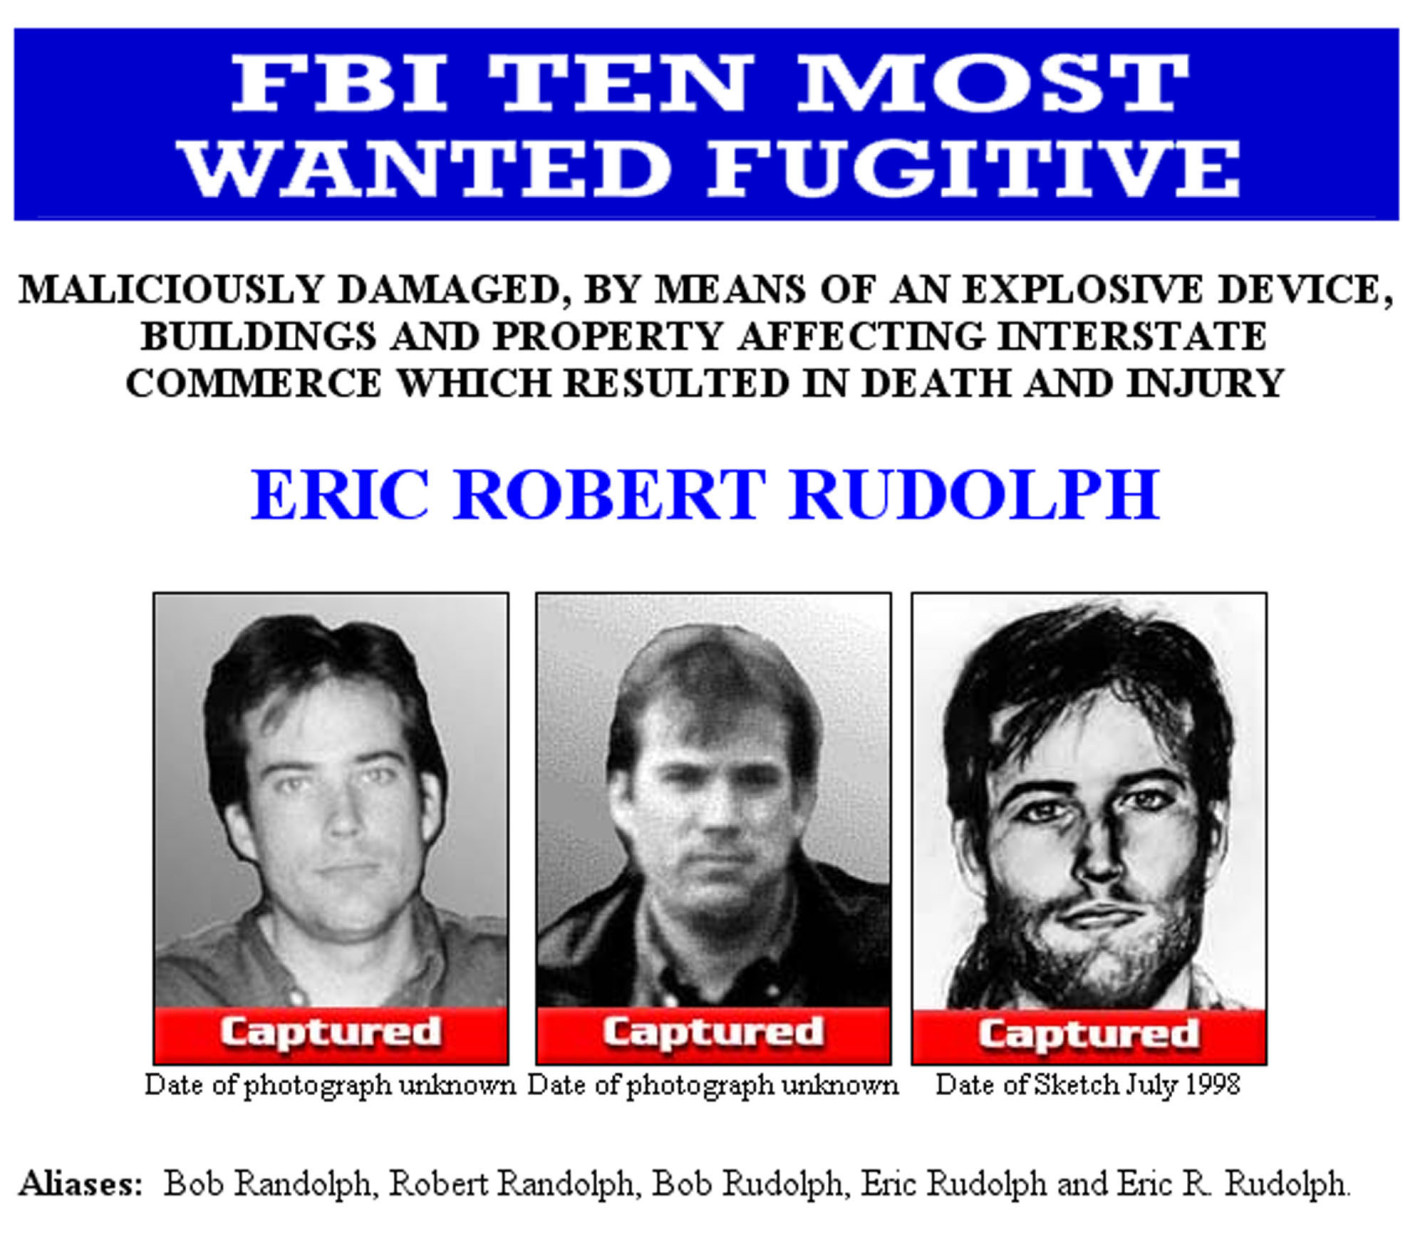 UNDATED:  This image taken from the Federal Bureau of Investigations Ten Most Wanted Fugitive Webpage shows fugitive Eric Robert Rudolph as captured. Authorities said May 31, 2003 that Rudolph was captured in the early morning hours by local Police Officer Jeffrey Postell in Murphy, North Carolina, the western area of the state where Rudolph has eluded capture for the past five years. His identity was confirmed through fingerprints according to the FBI. Rudolph, one-time carpenter who vanished in early 1998, is suspected in a Birmingham, Alabama abortion clinic, which killed an off-duty police officer and disabled a nurse. He was later was charged in the bombing at Atlanta's Centennial Olympic Park during the 1996 Summer Olympics, where one person was killed and more than 100 were injured. He was also charged in the 1997 explosions at an abortion clinic and a gay nightclub in the Atlanta area. U.S. Attorney General John Ashcroft could decide if Rudolph would get the death penalty.  (Photo by FBI/Getty Images)